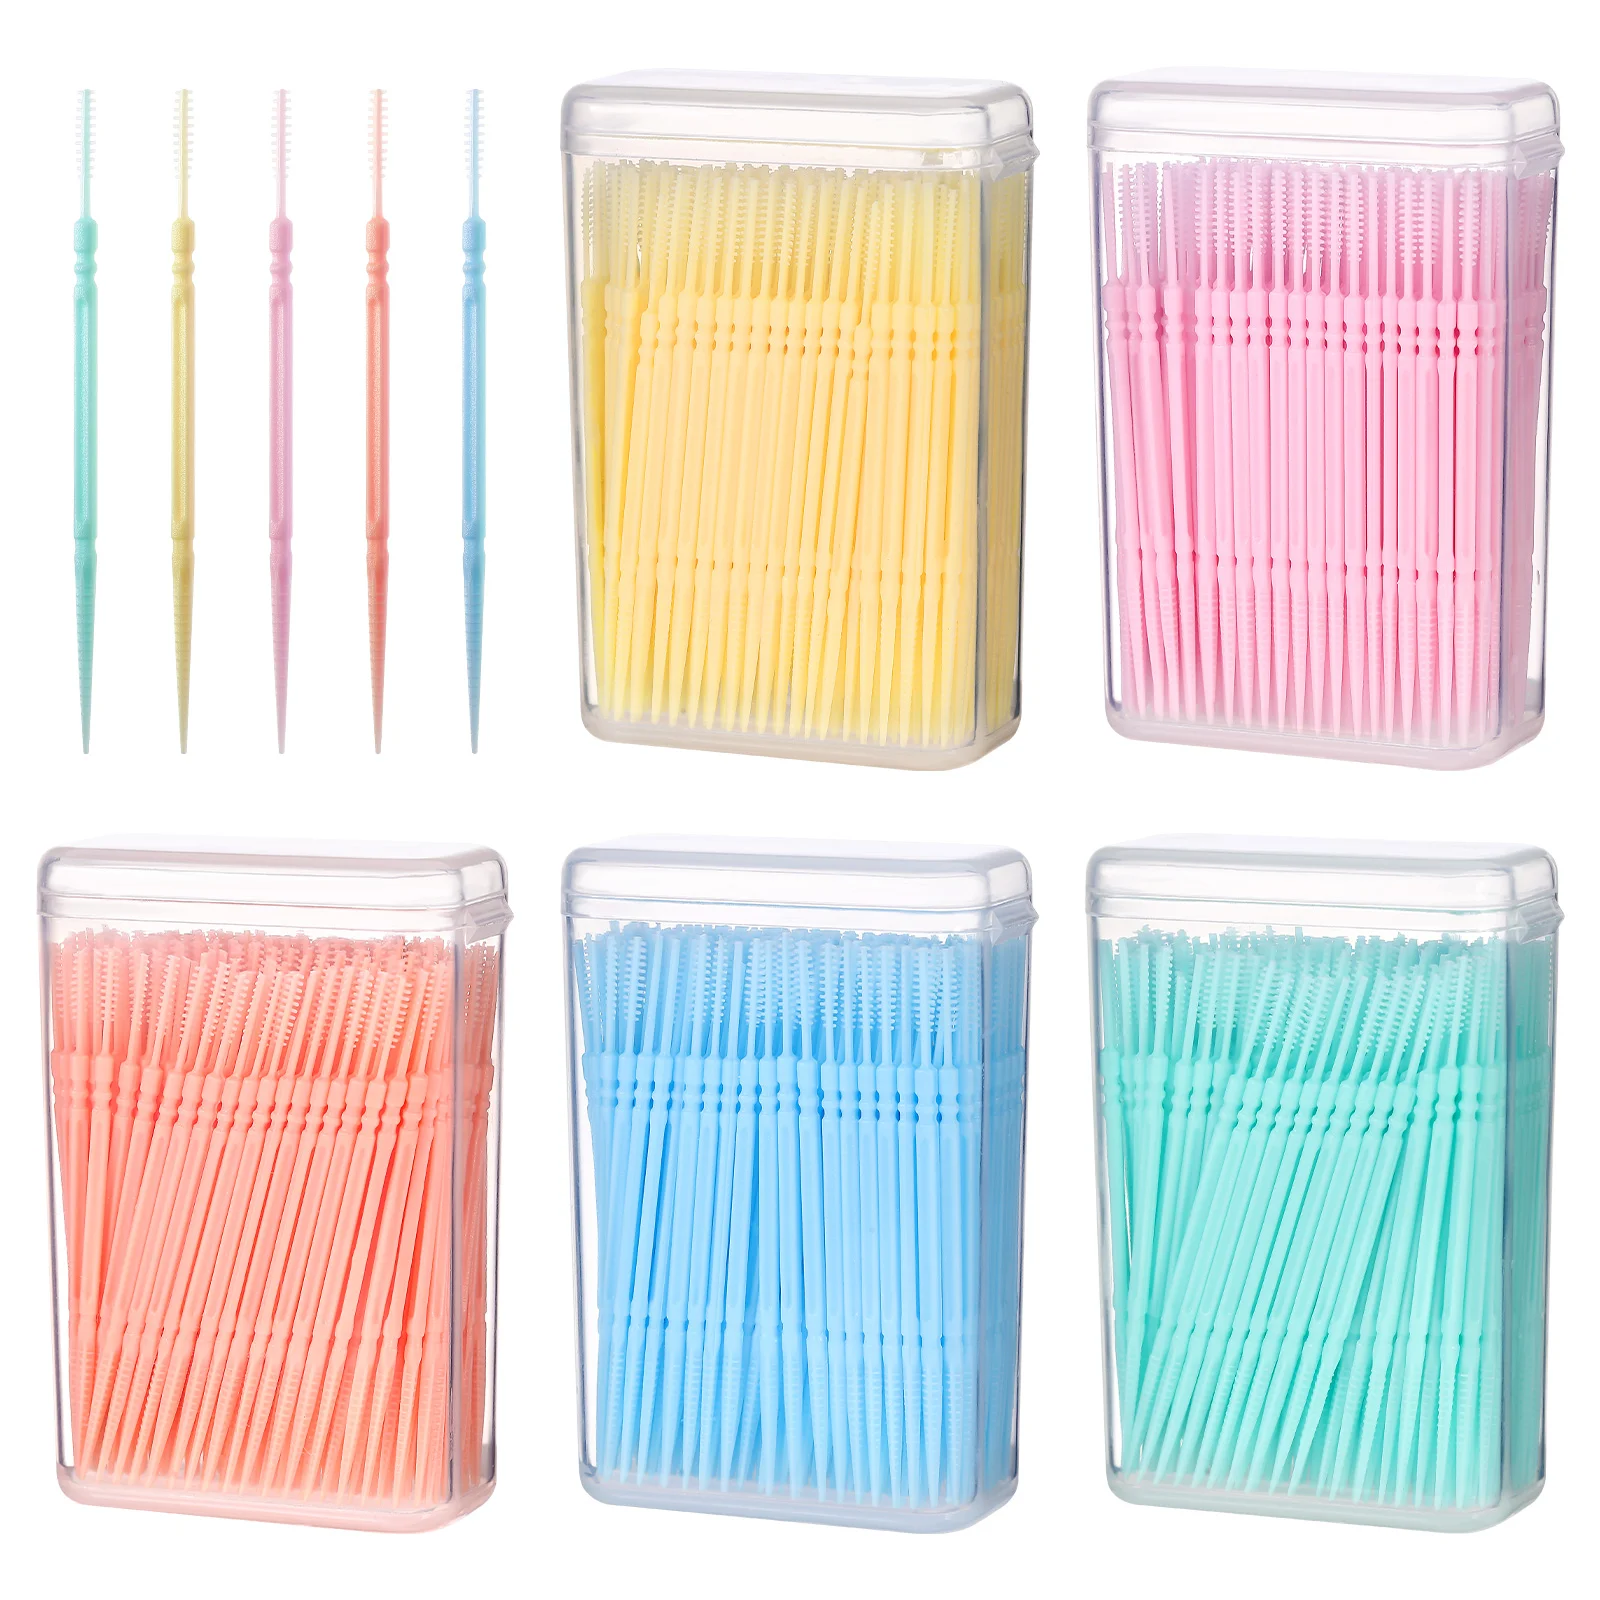 

1100pcs Interdental Toothpicks Disposable Toothpick Brush Picks Oral Care Interdental Toothpicks (Random Color) Products